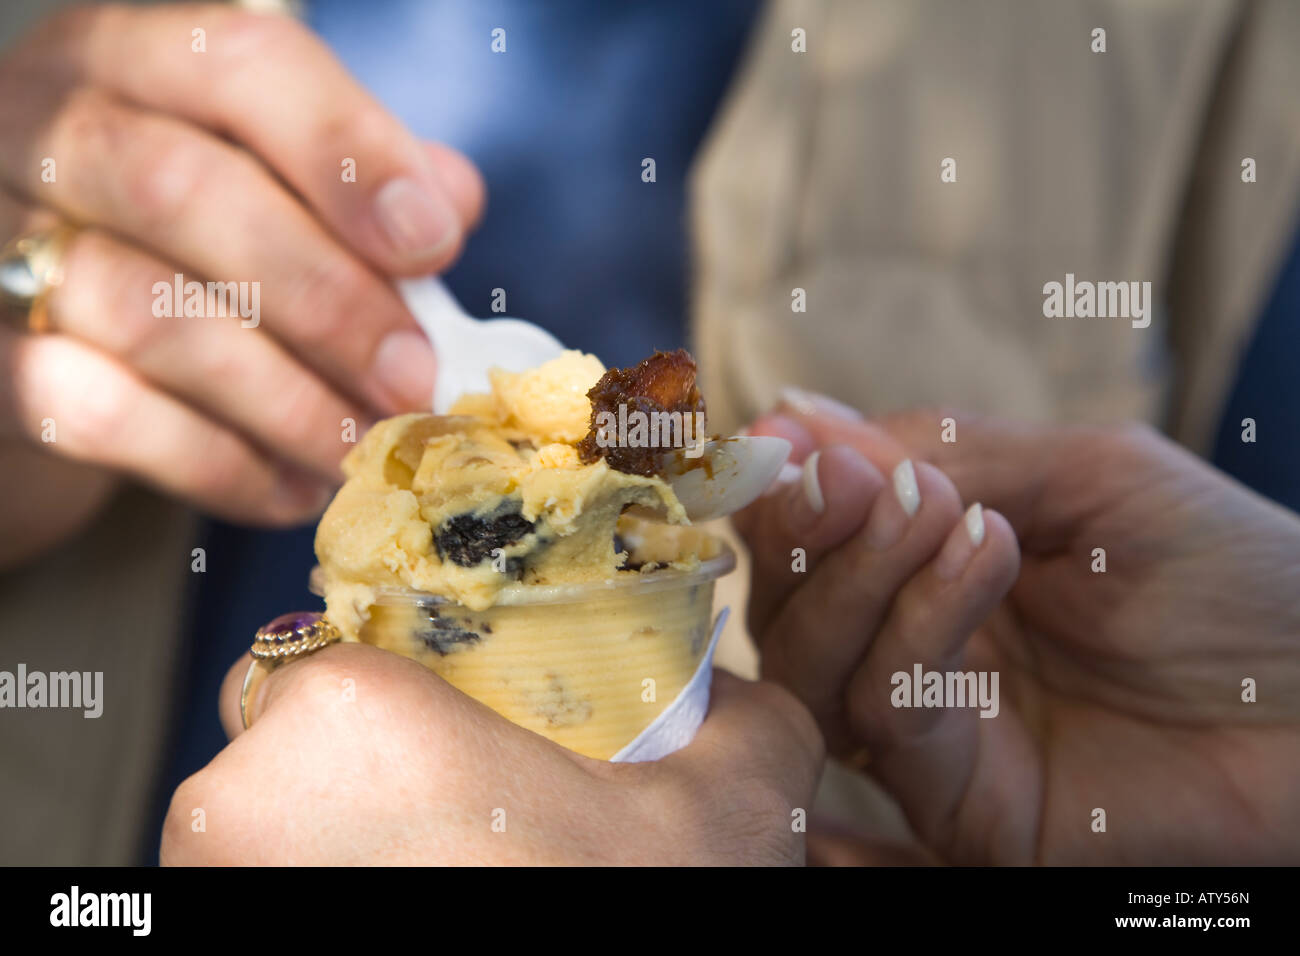 MEXICO Dolores Hidalgo Hands of man and woman eating ice cream purchased from street vendor in plaza local specialty Stock Photo